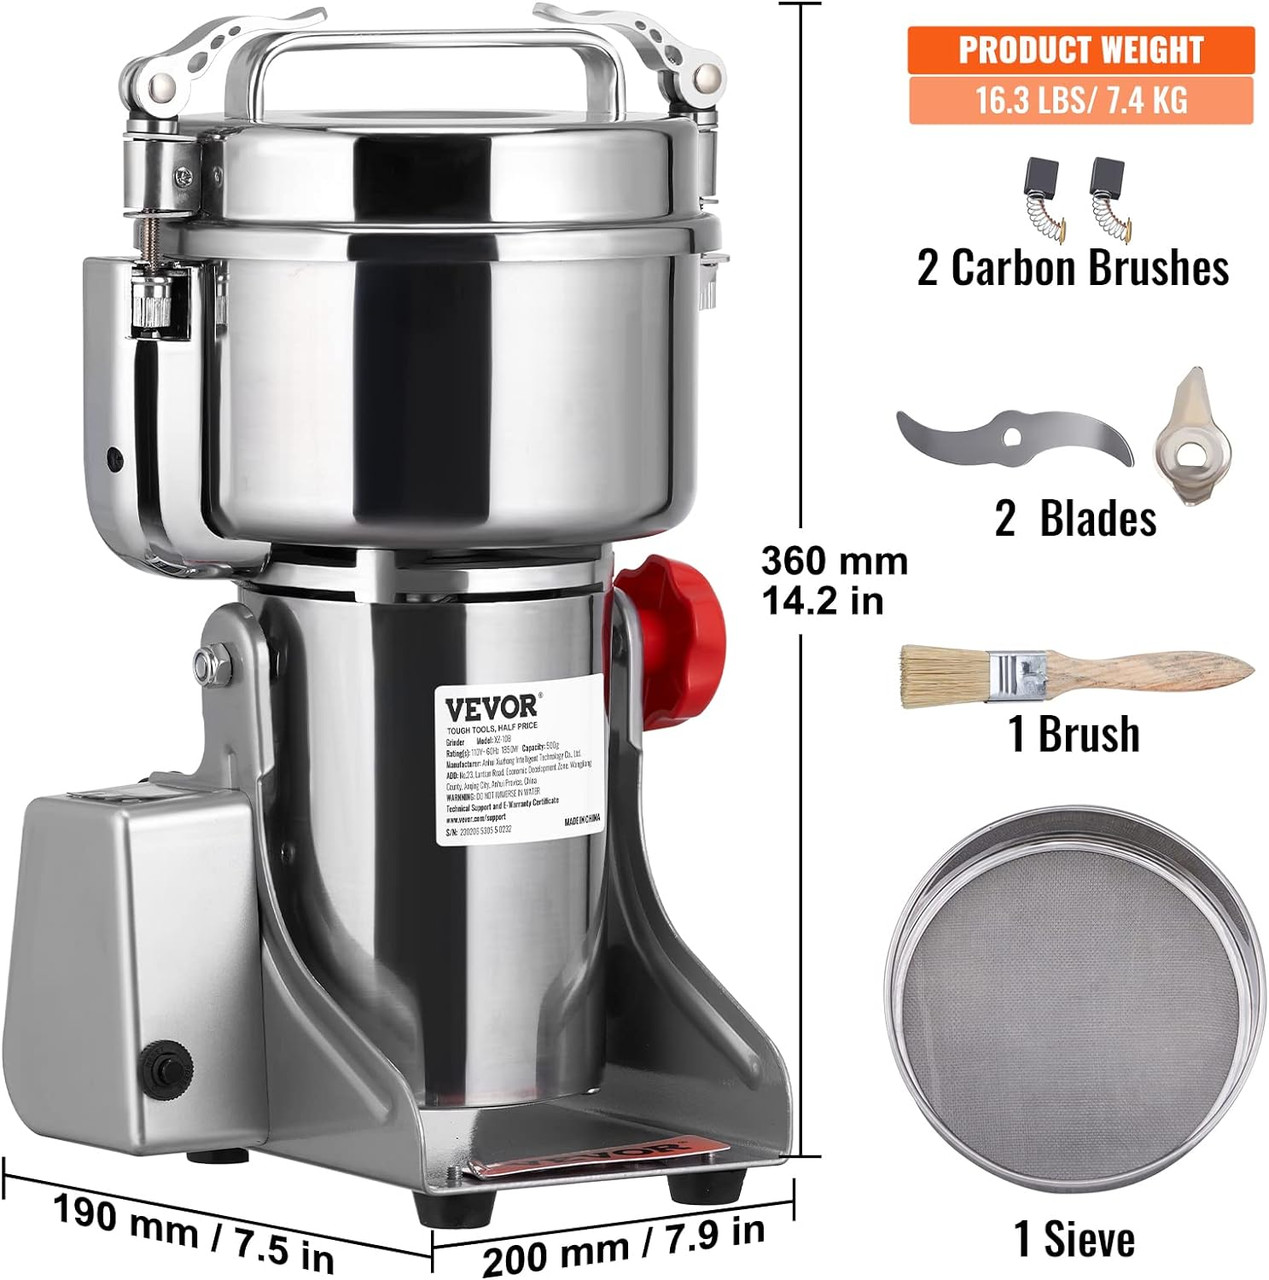 2500g Commercial Spice Grinder Electric Grain Mill Grinder High Speed